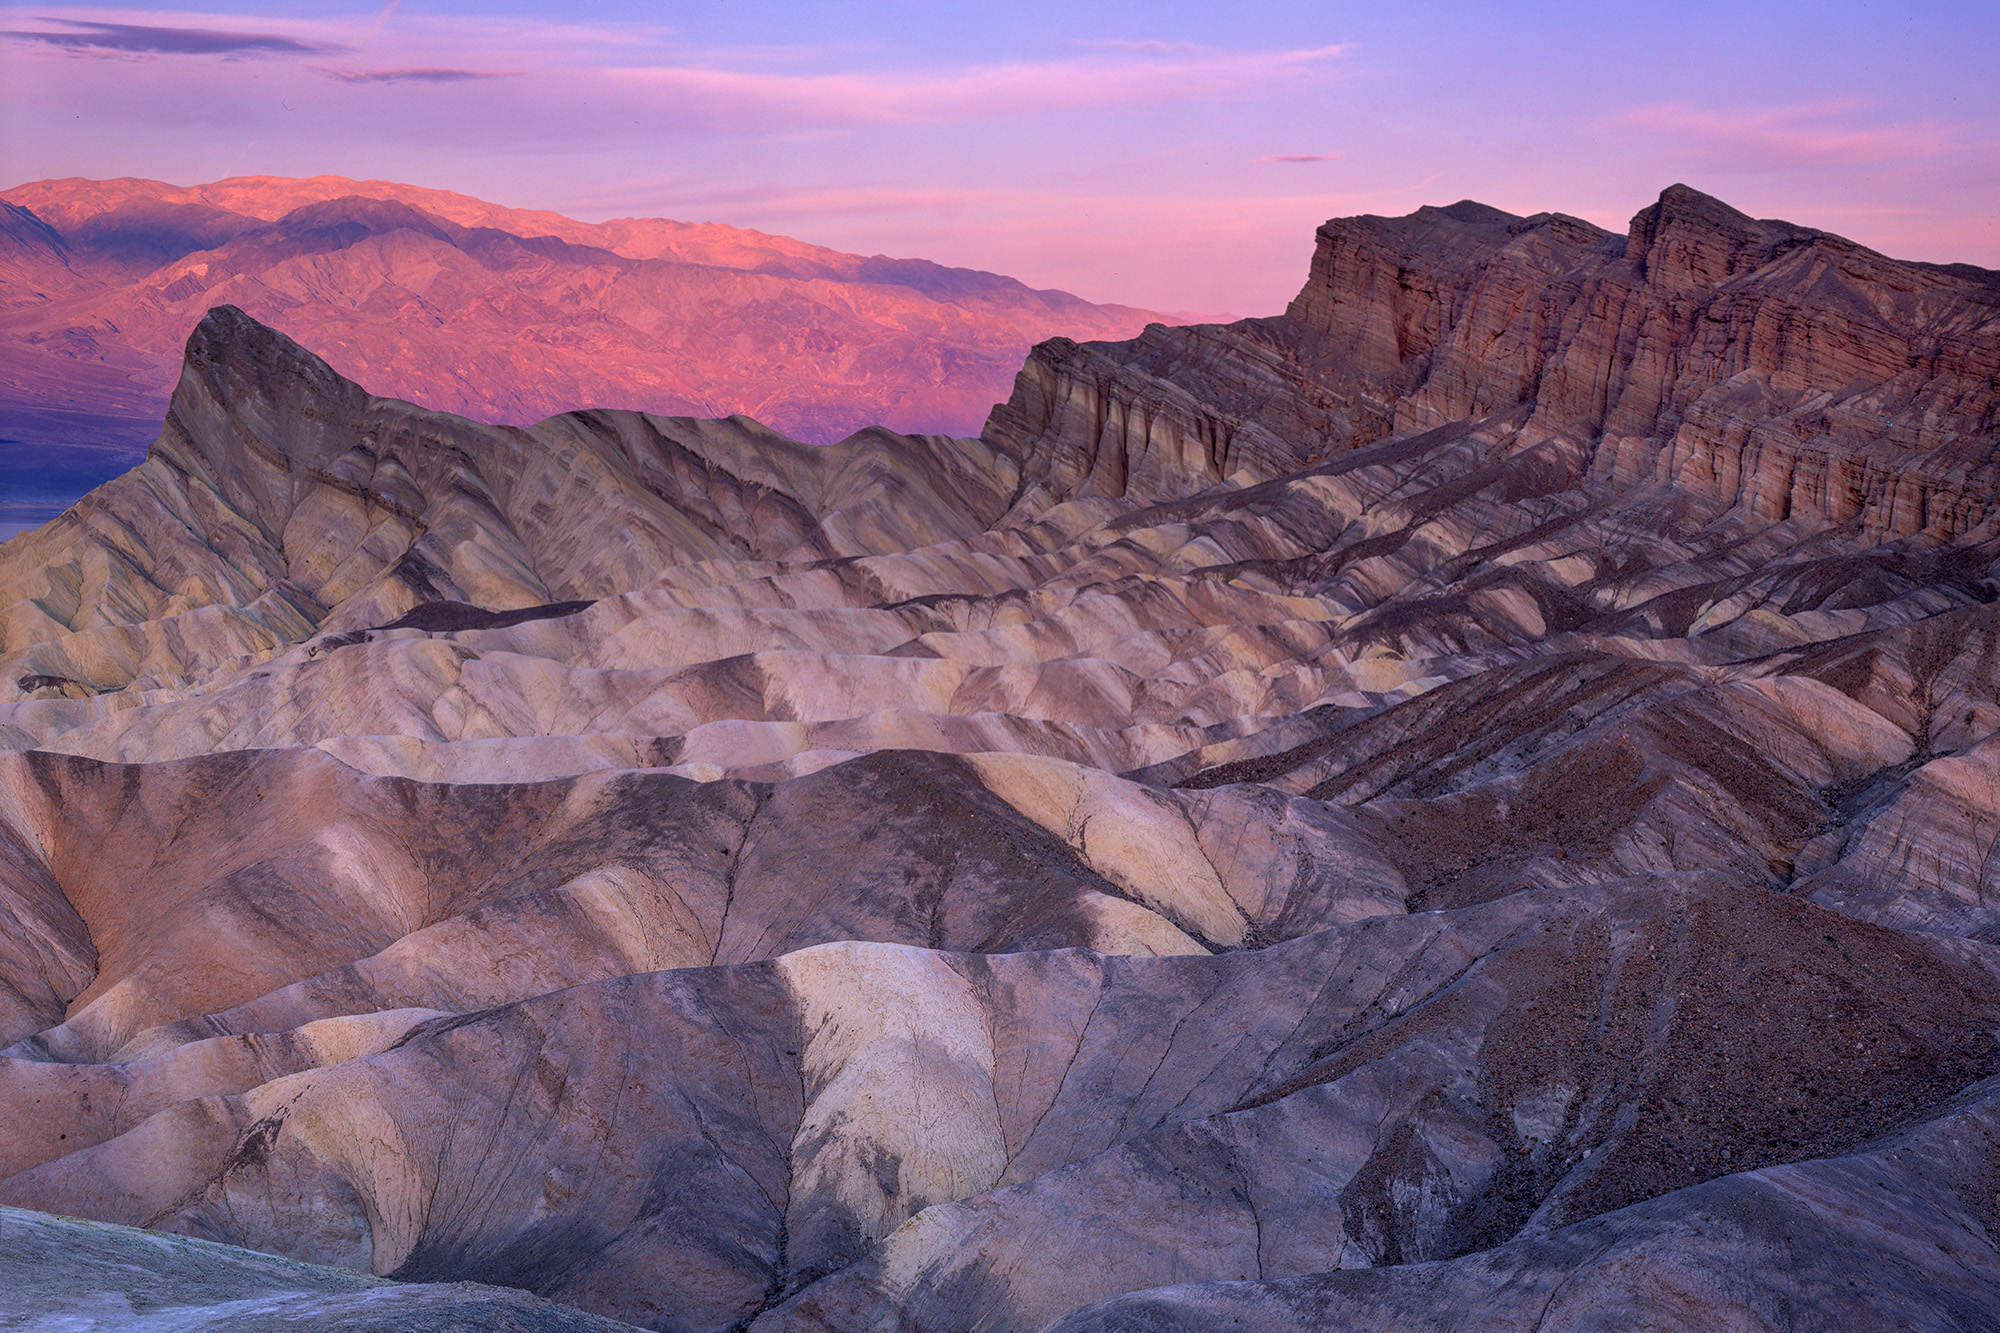 In this awe-inspiring image, captured at the break of day in Death Valley National Park, the striking beauty of Zabriskie Point...